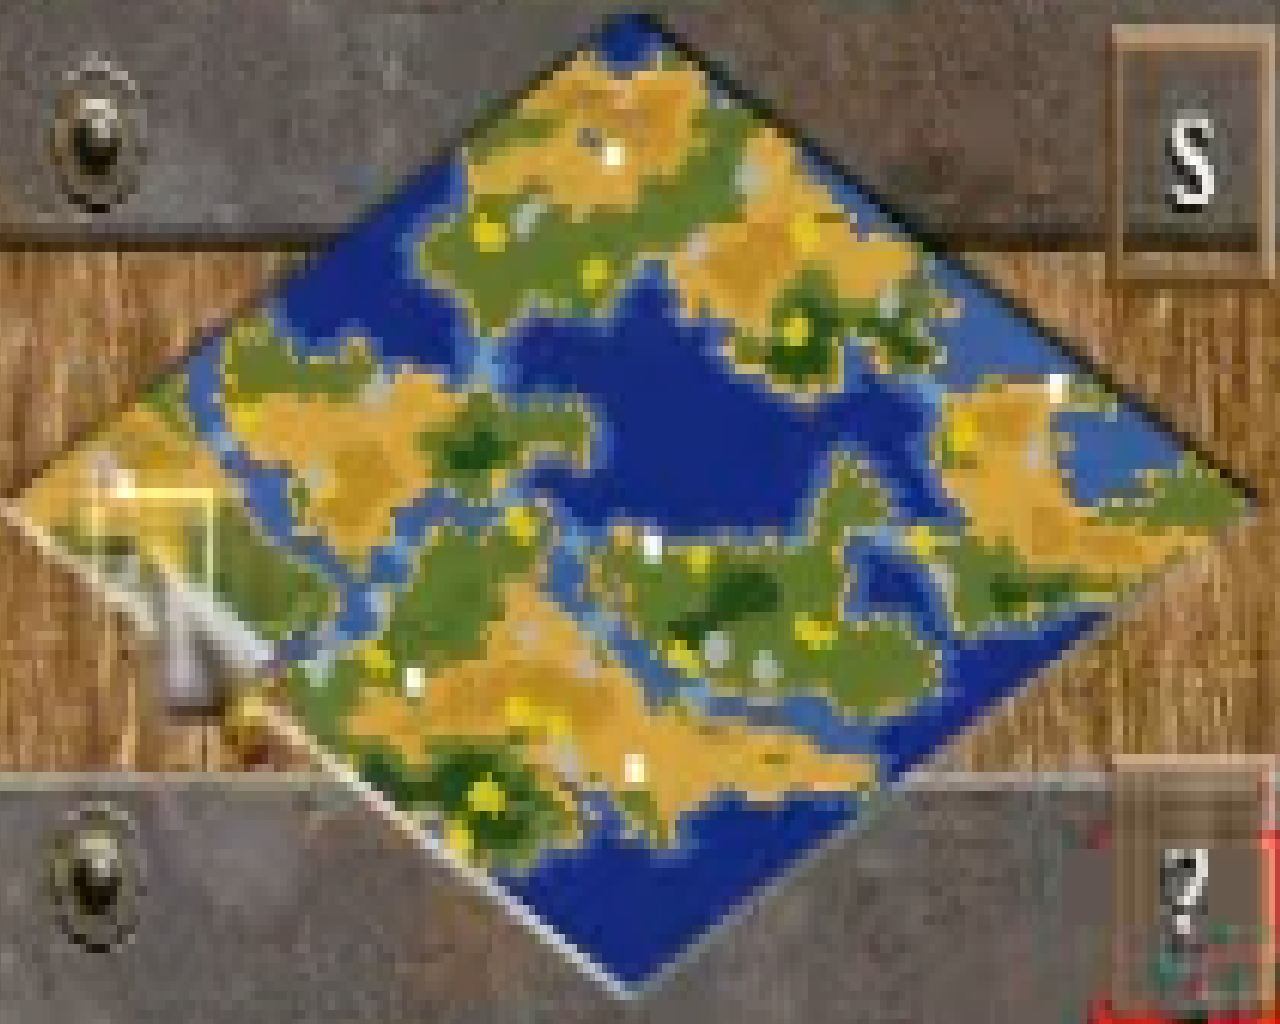 age of empires 2 maps